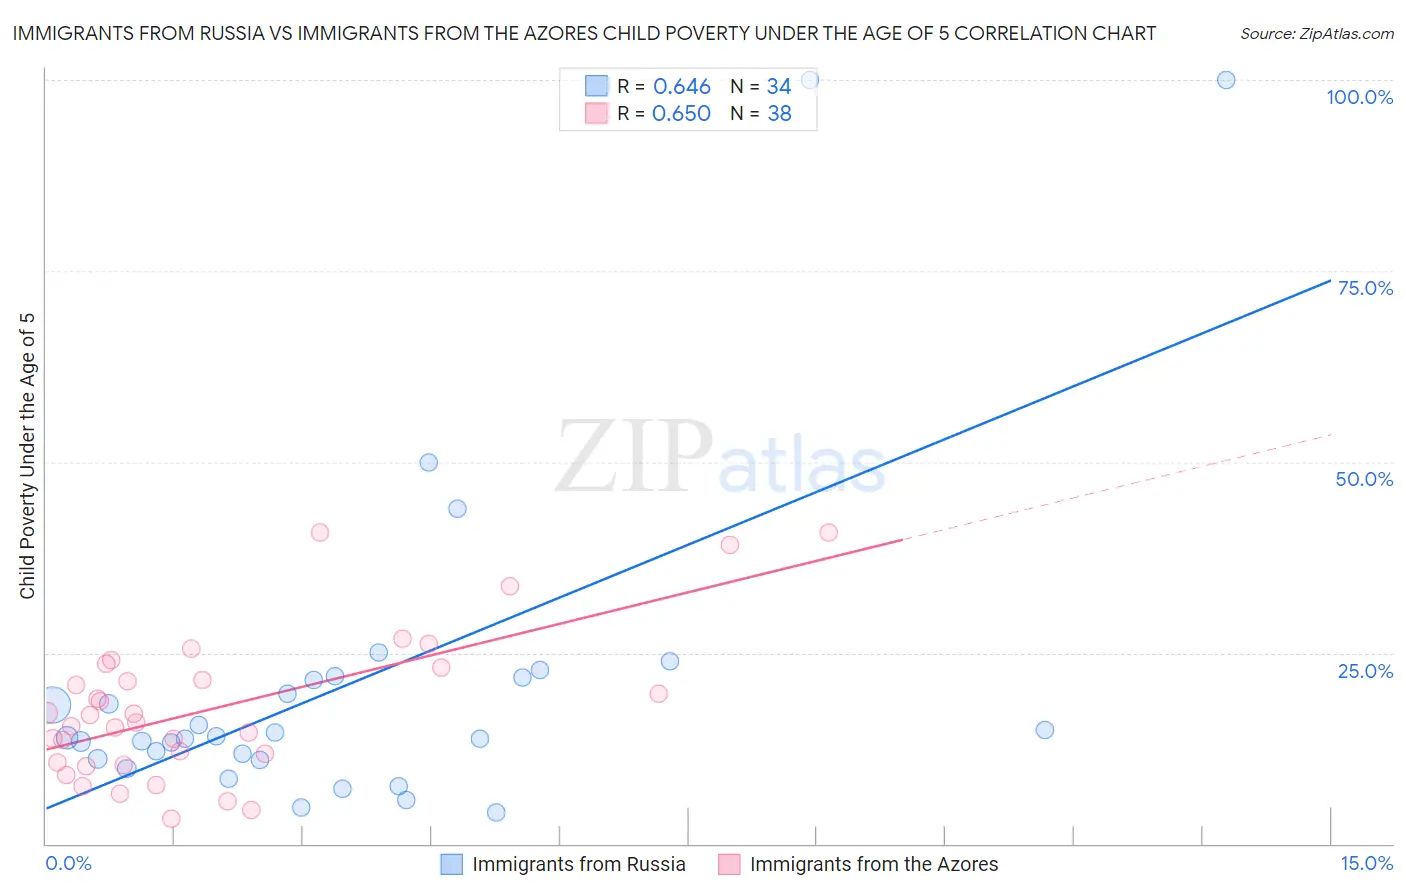 Immigrants from Russia vs Immigrants from the Azores Child Poverty Under the Age of 5